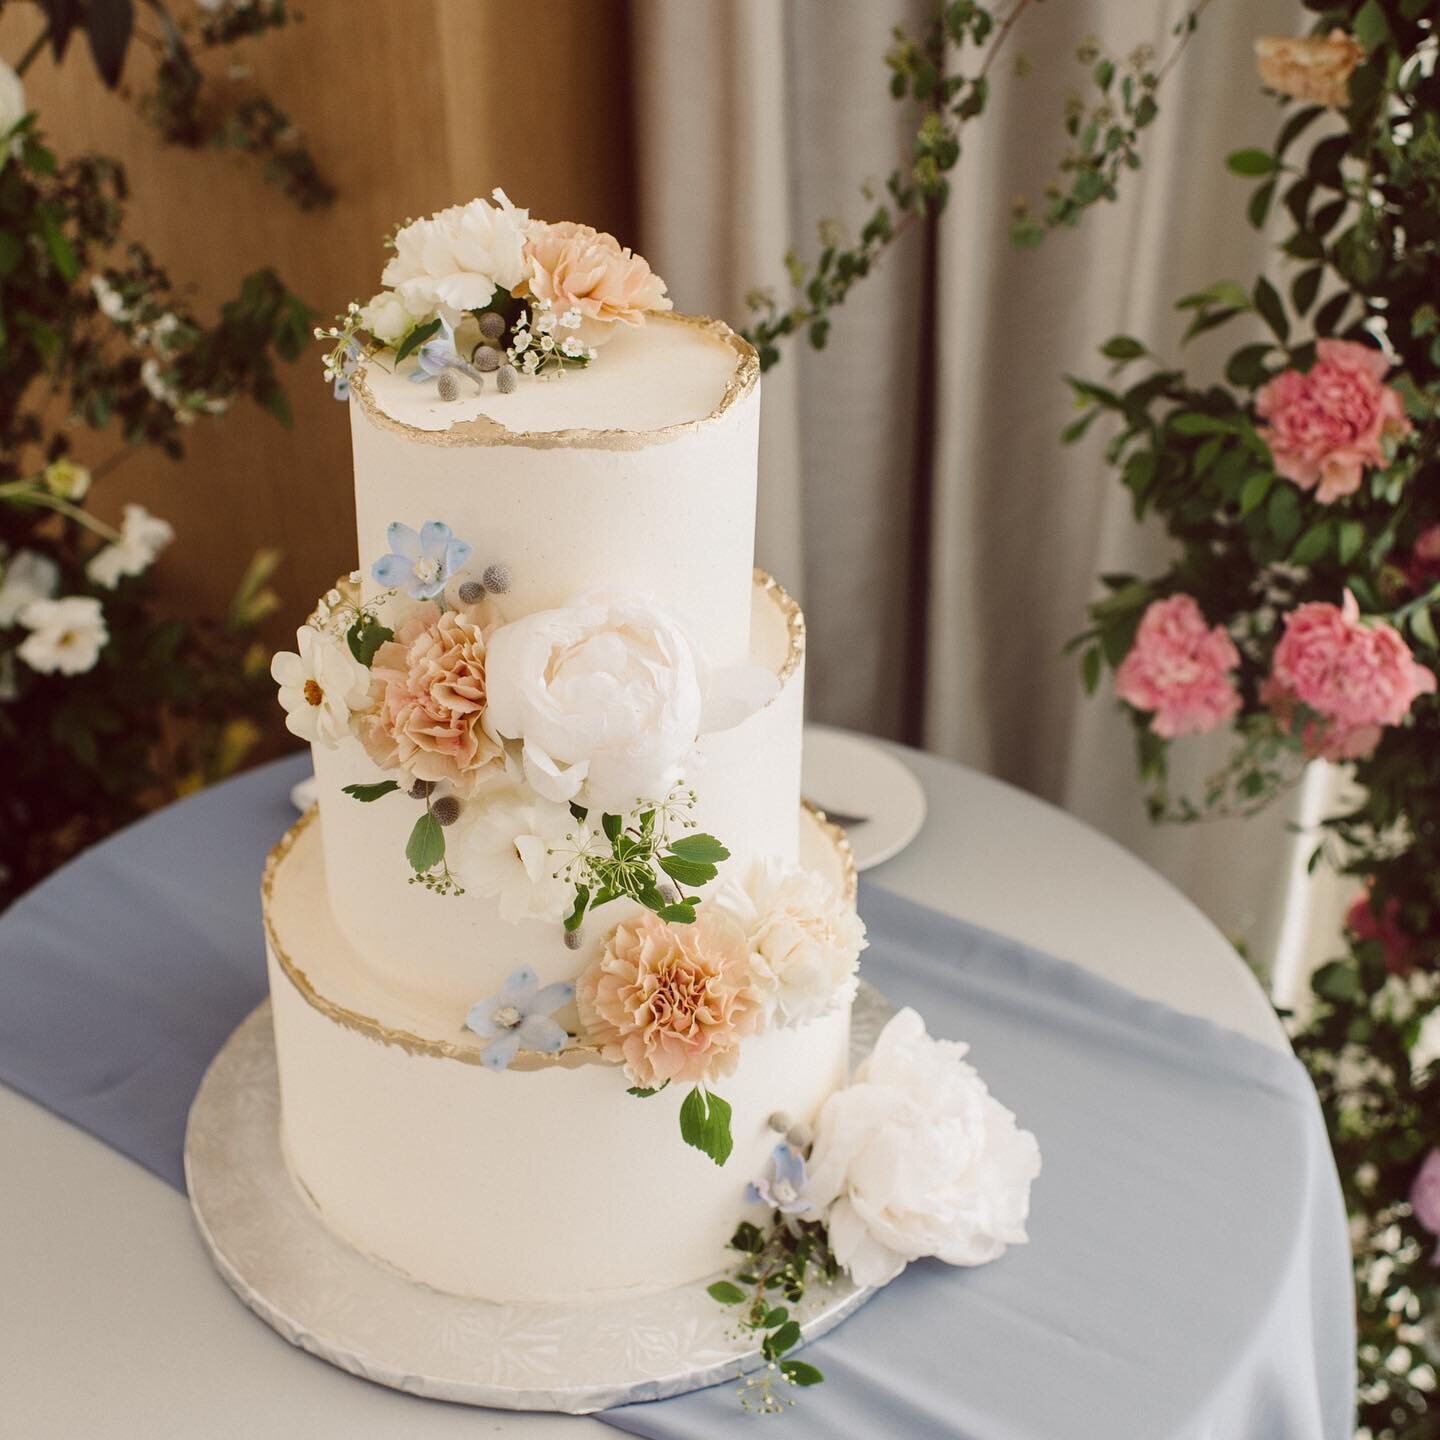 Cake flowers are the sweetest- pun intended!! Often overlooked when it comes fo managing the millions of details for your big day, styling any form of dessert remains one of my favorite floral opportunities 🍰🧁🍨@heykaris on the photo. 
.
.
.
.
.
#c